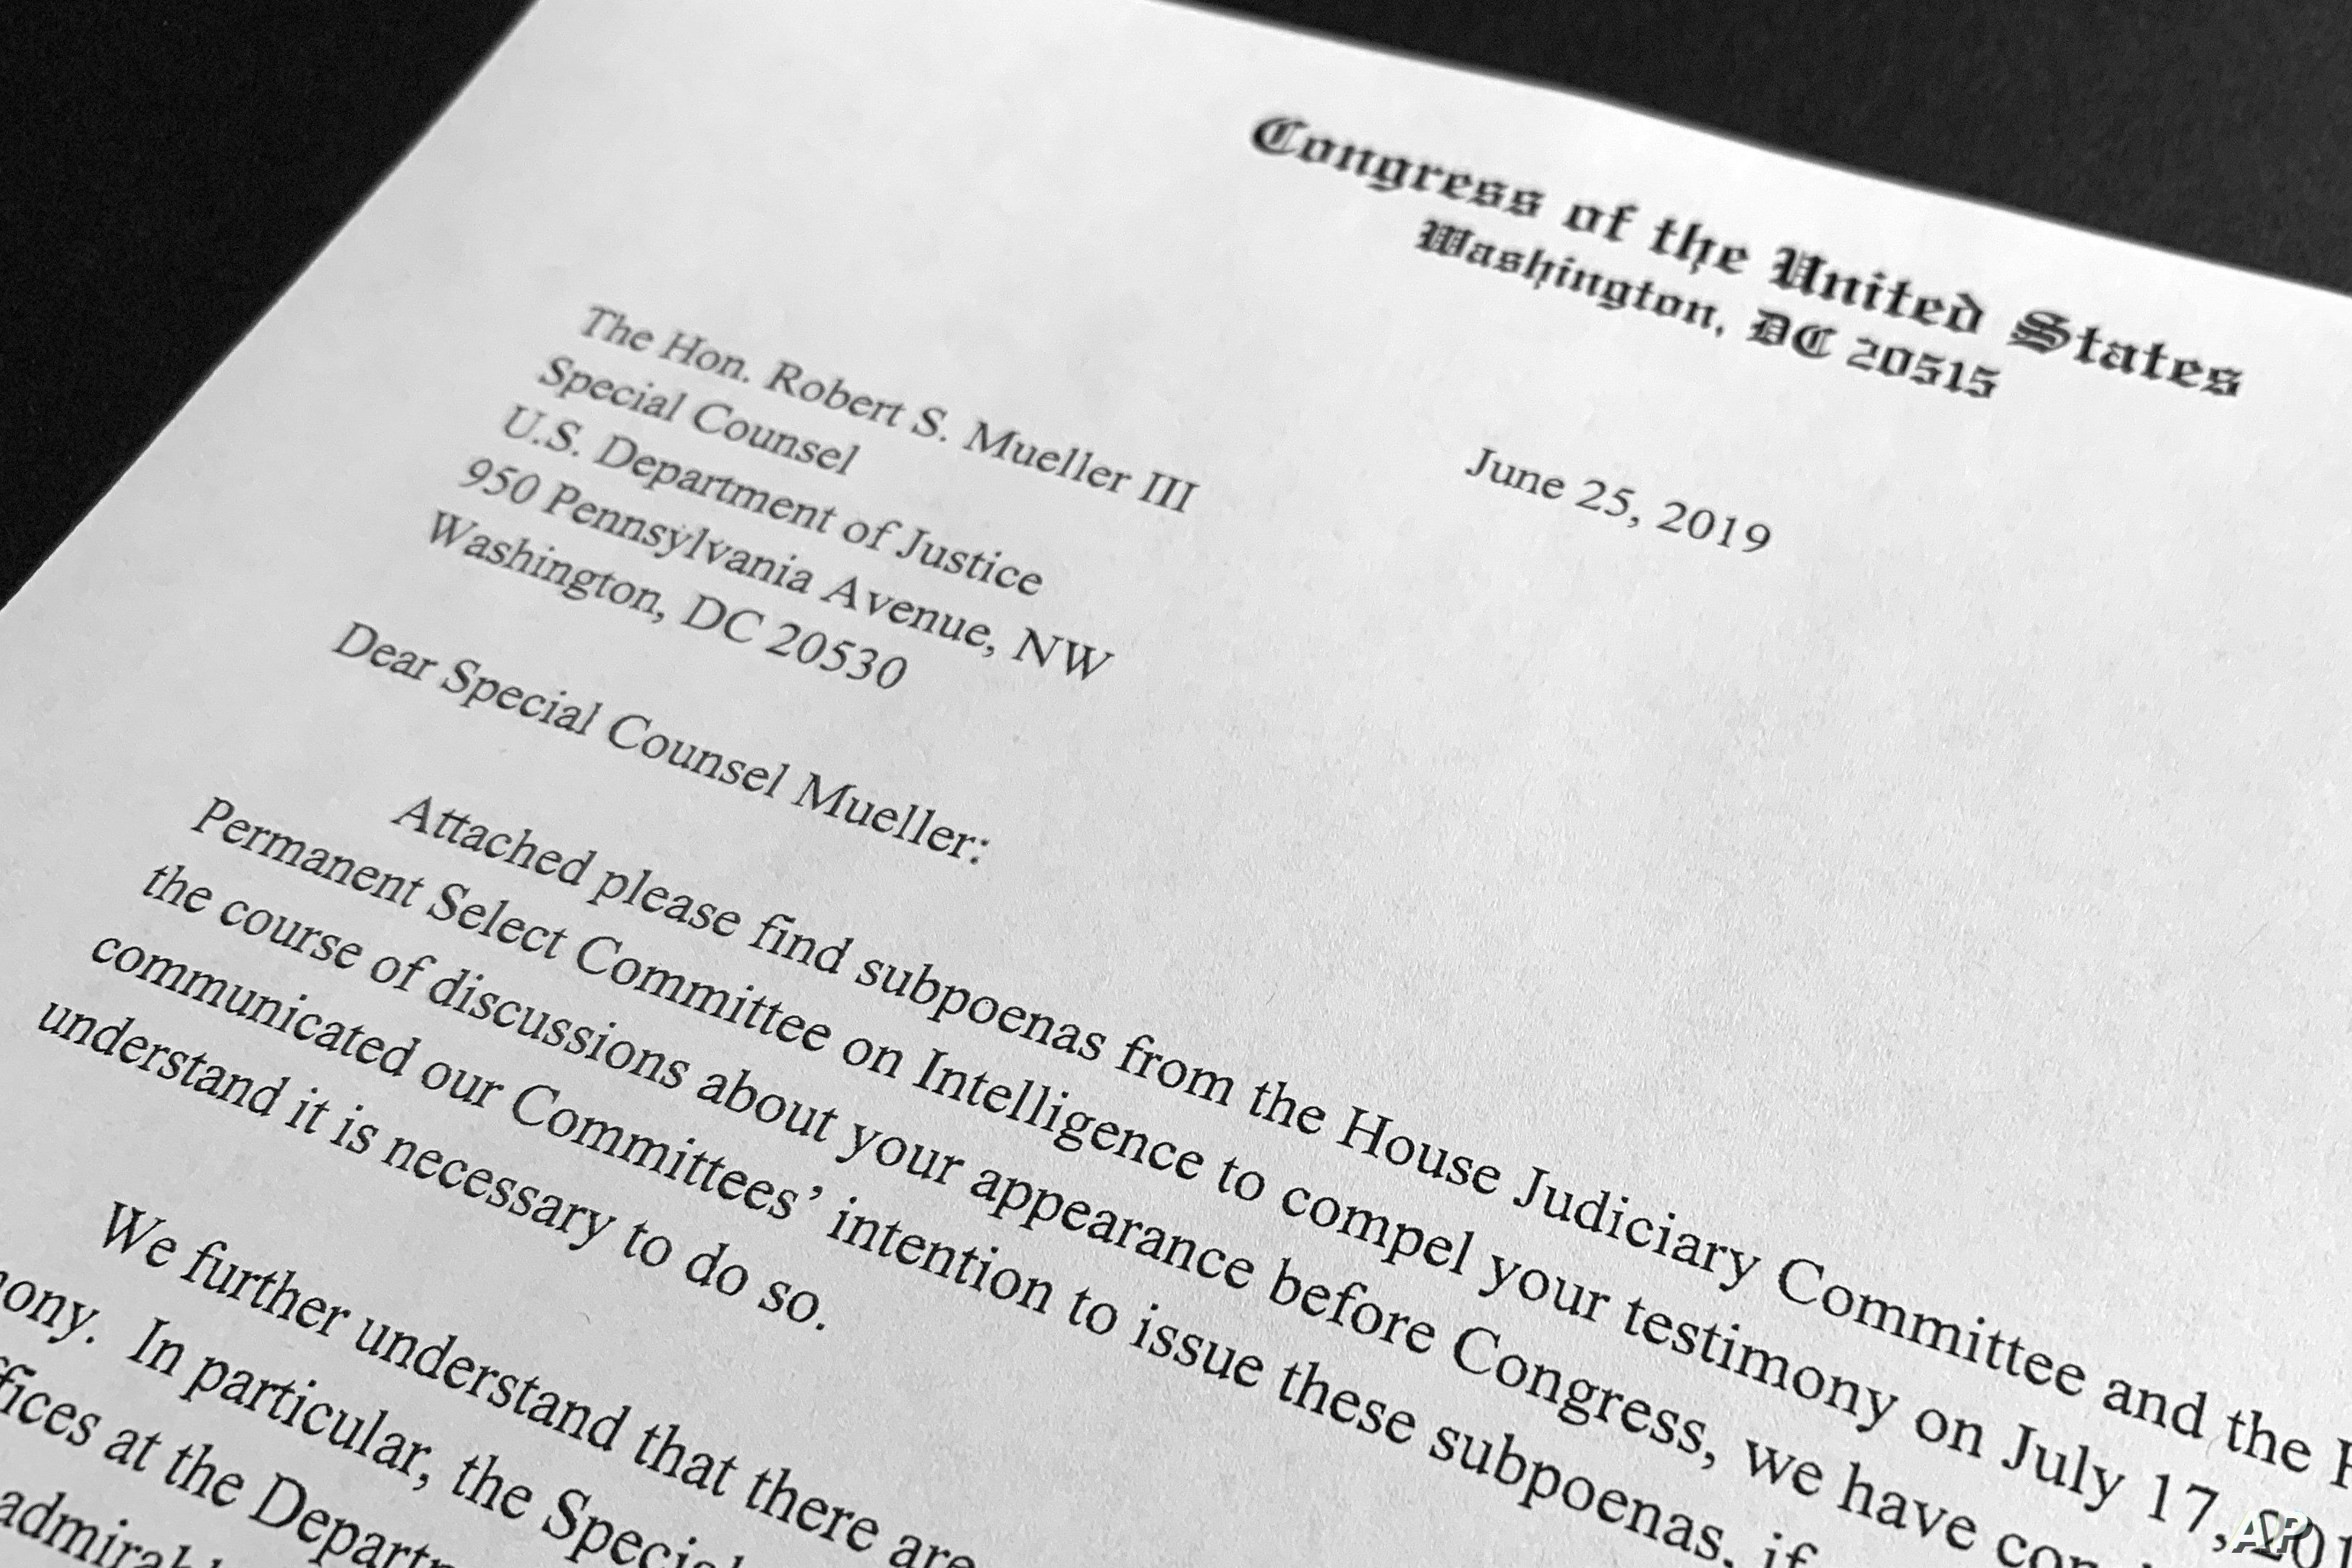 The letter from House Judiciary Chairman Jerrold Nadler and House Intelligence Committee Chairman Adam Schiff to Robert Mueller that was sent with subpoenas to compel Mueller's testimony on July 17, is photographed in Washington, June 25, 2019.